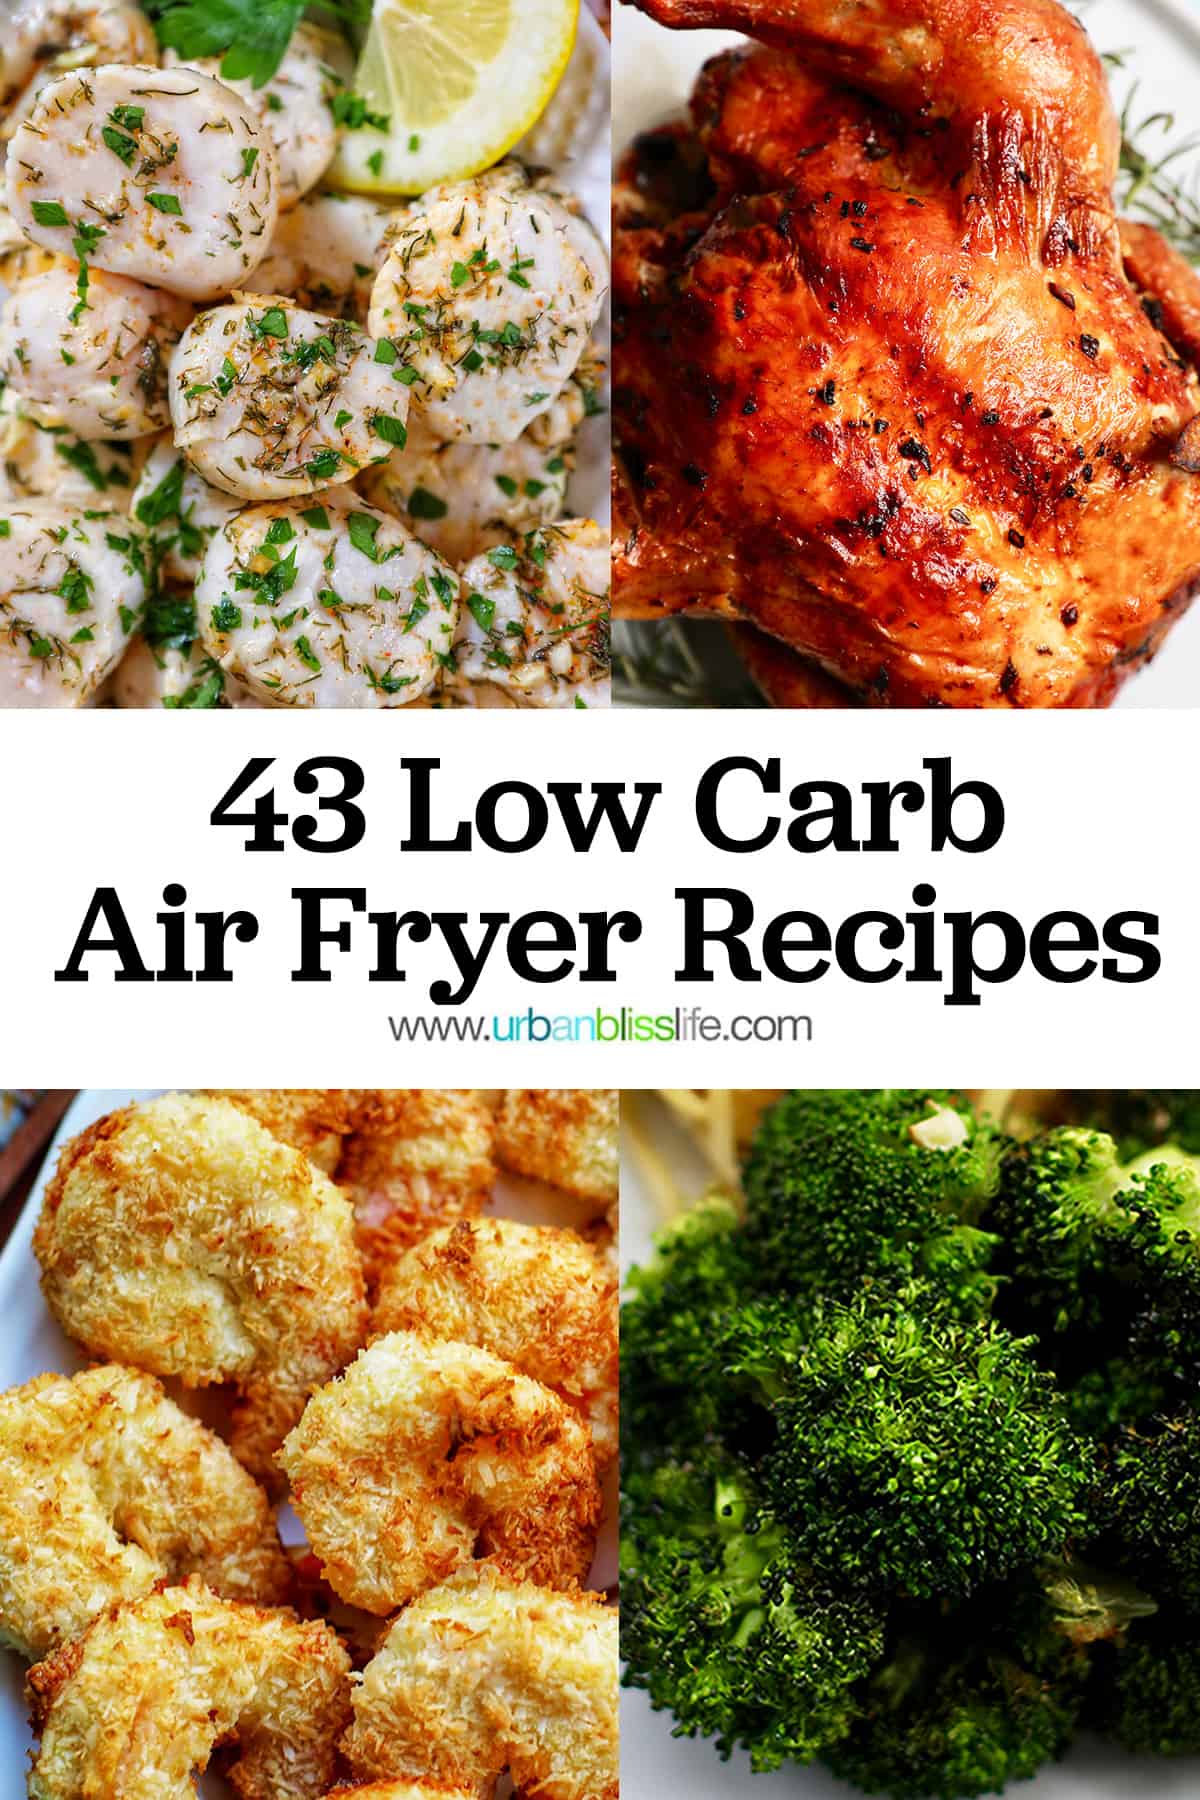 low carb air fryer recipes with title text overlay.